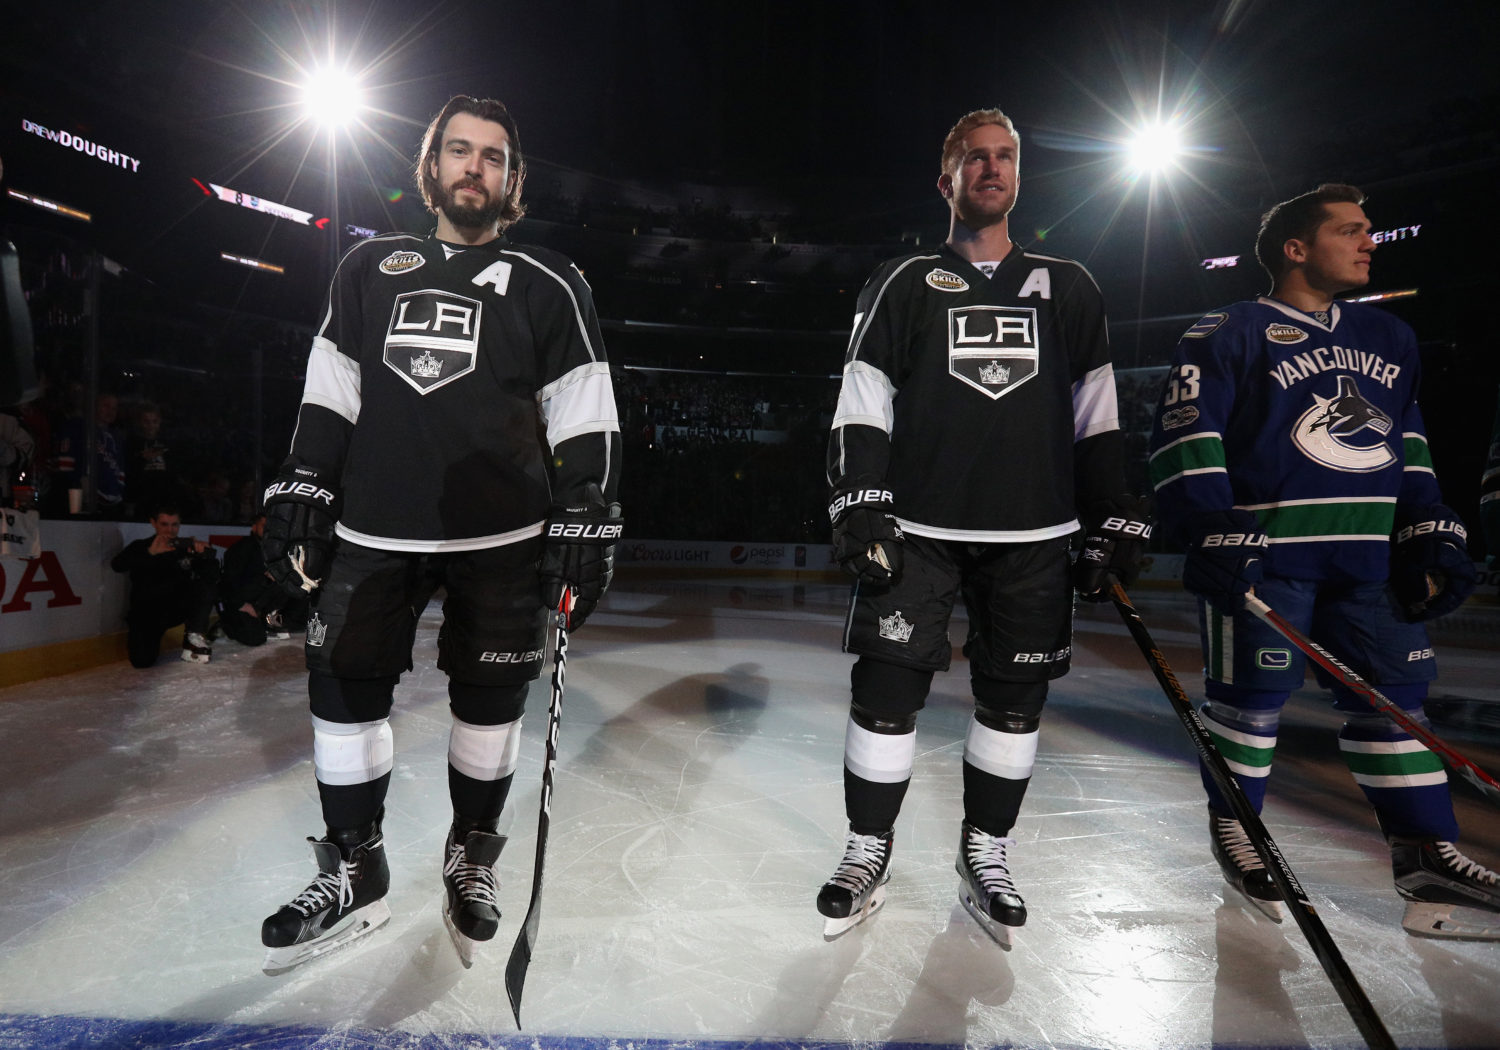 The best photos from the 2017 NHL All-Star Game weekend 